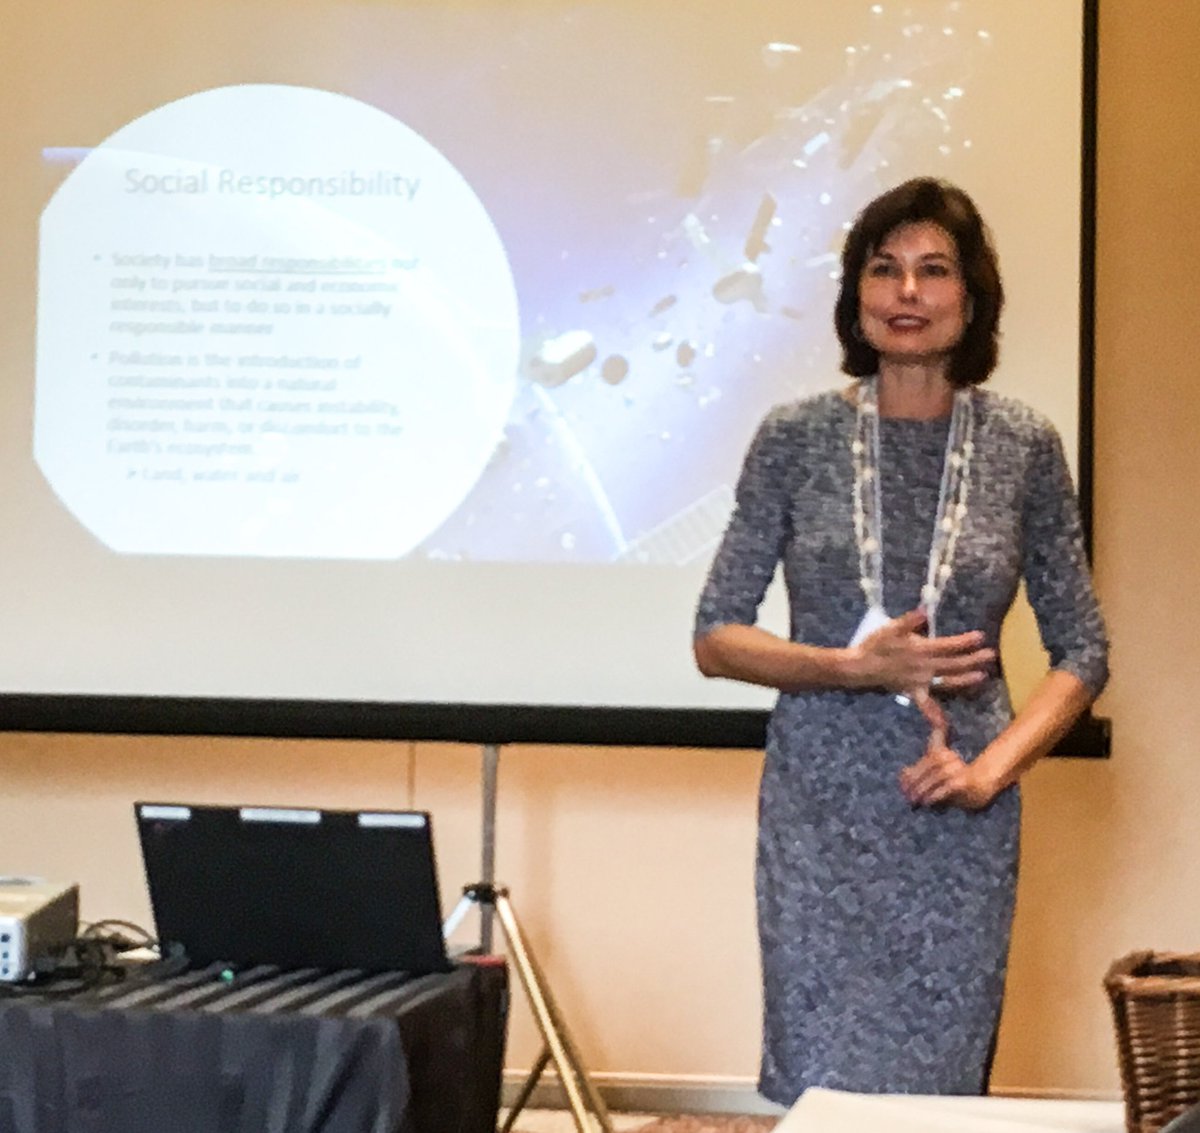 Dr. Curtis recently presented a research project named “Space Junk” at Applied Businesses and Enterpreneurship Conference, this project is co-authored with Dr. Arnaud.
#BusinessOfFlight
#BusinessOfSpace